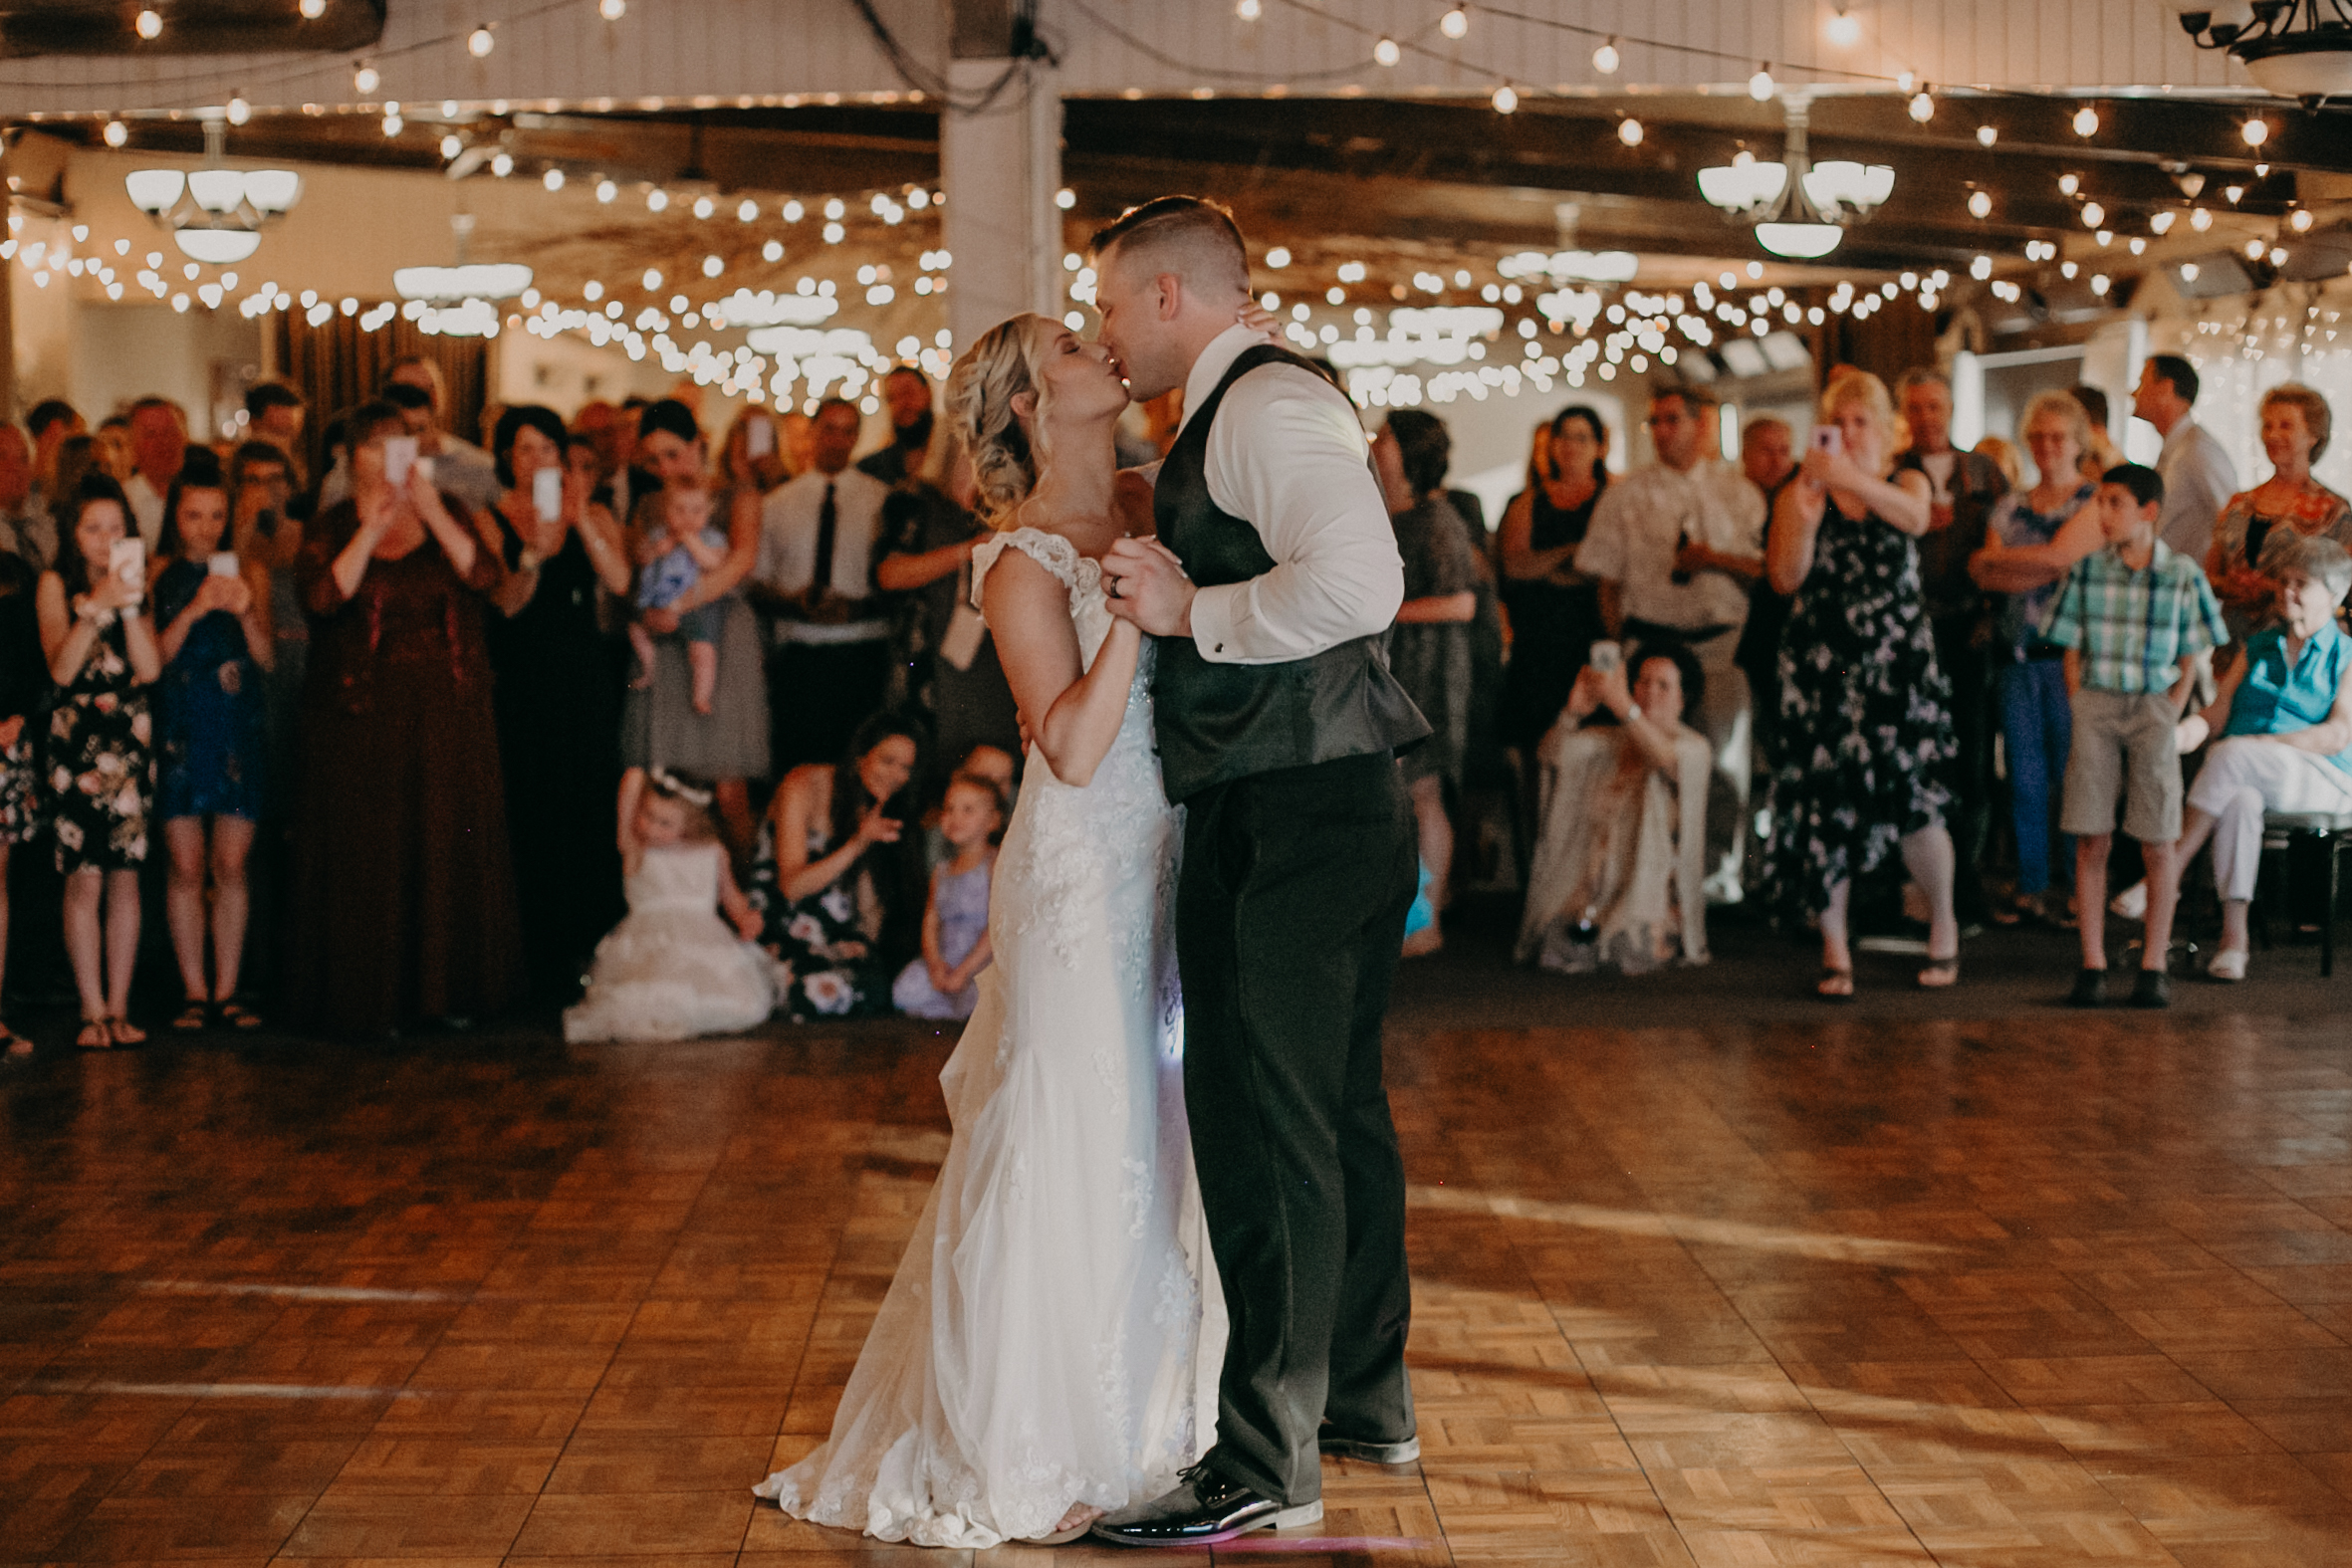  RiverEdge Golf Club first wedding dance photographed by Andrea Wagner 